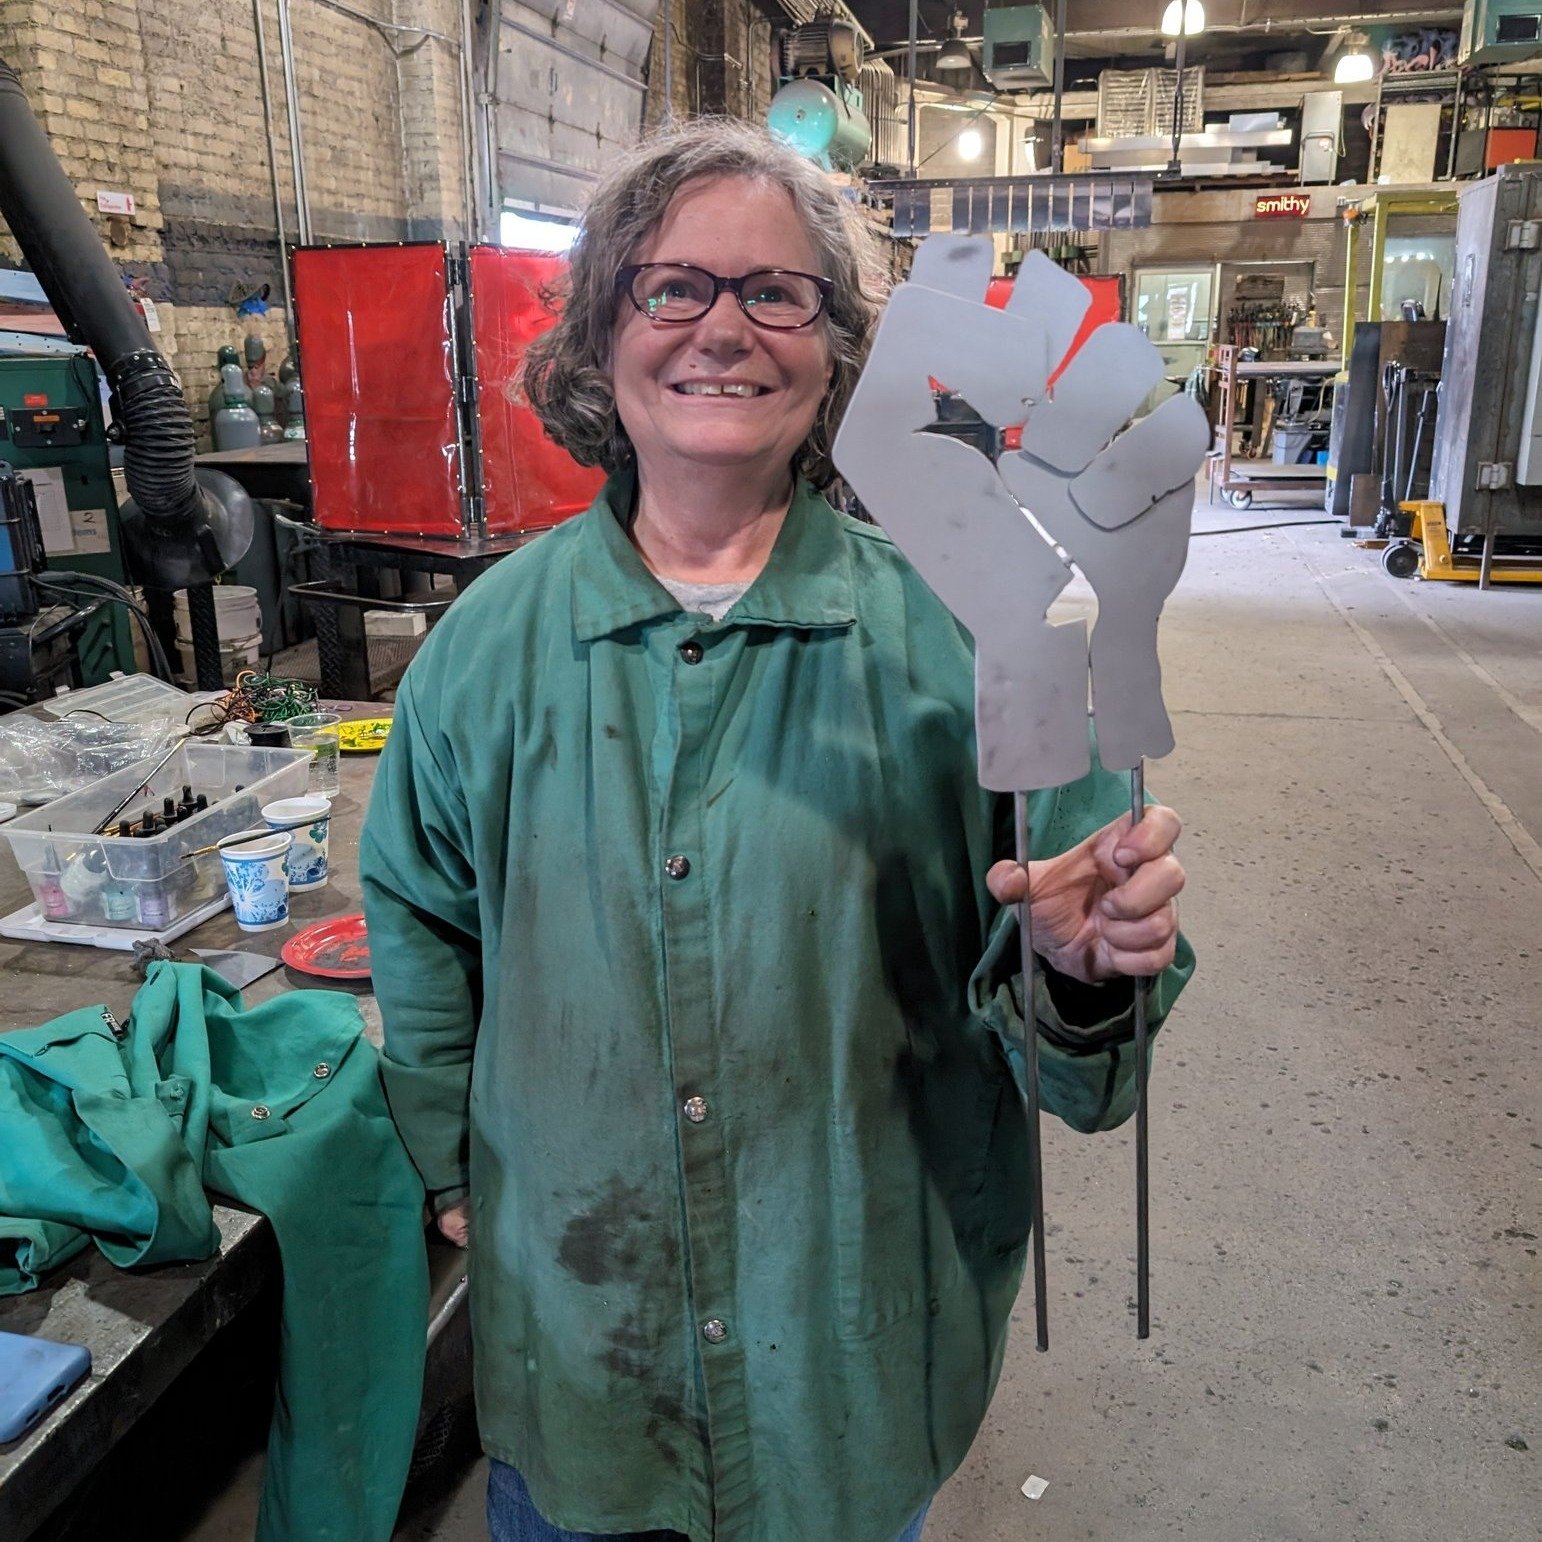 Today's GFS neighbor workshop was a success! We saw one garden stake fist and a whole bunch of cast pewter fist pendants and pins made by participants. More to come in June!

[Image descriptions: 1. A woman stands smiling at the camera, holding up he